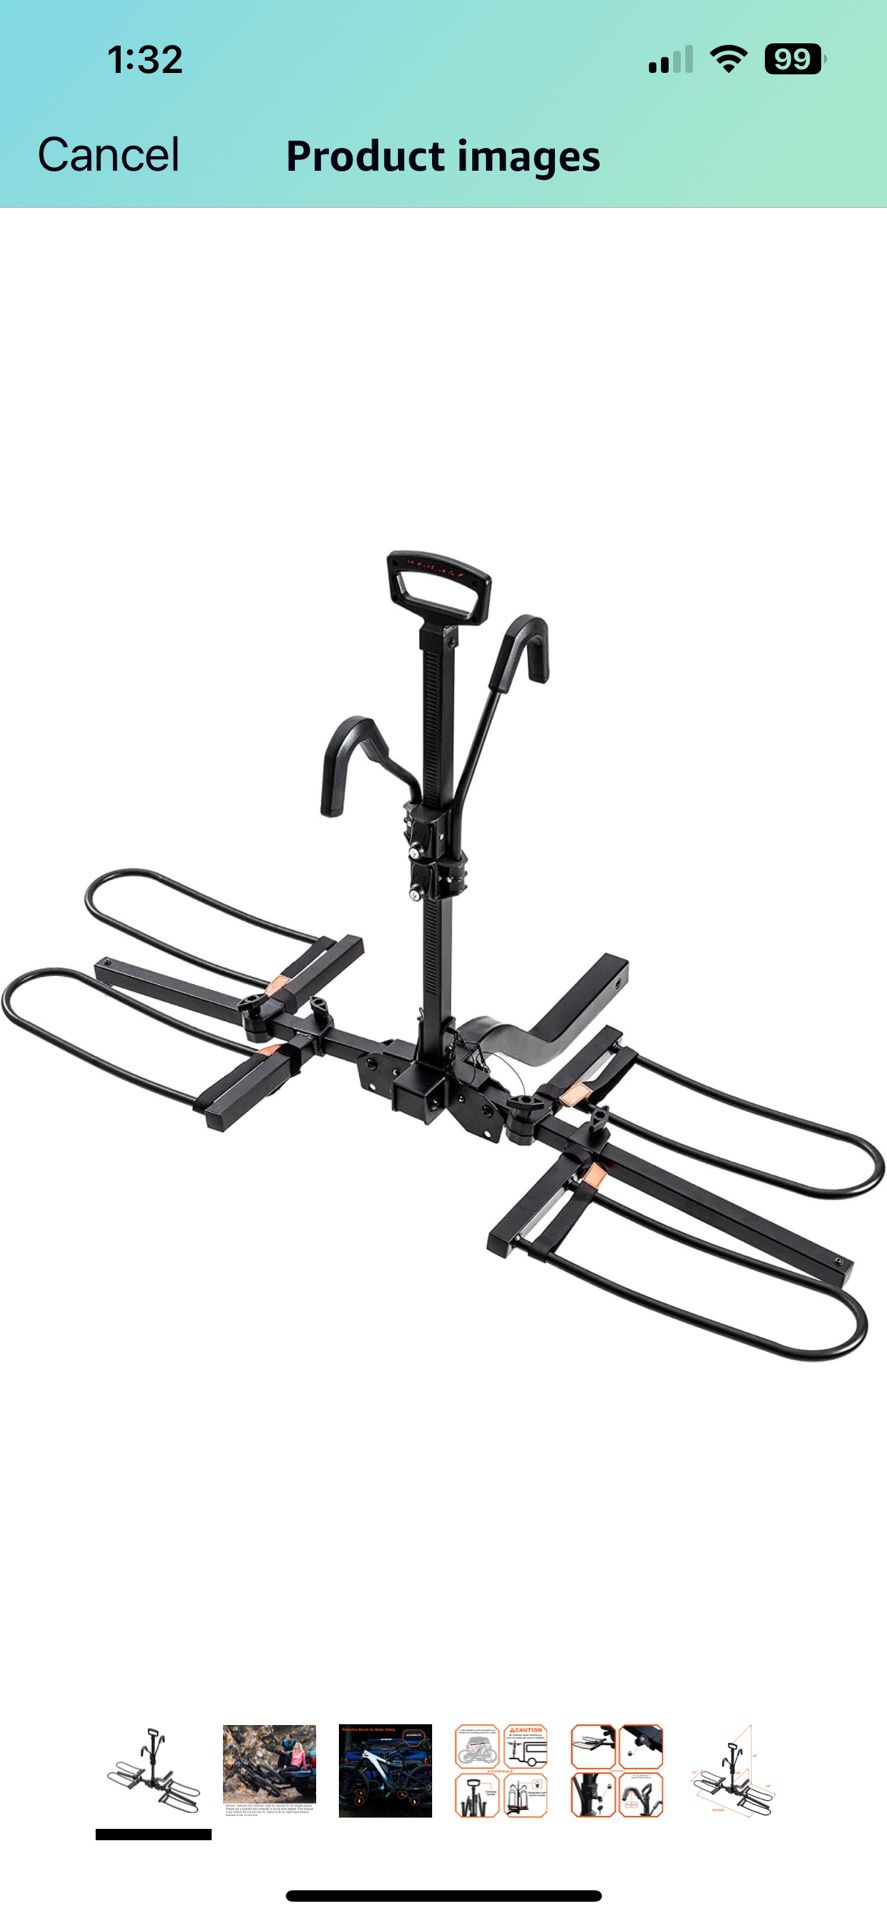 Brand New 2 -E-Bike Hitch Mounted Platform Style 2 Bikes HEAVY DUTY Carrier Rack - Fits Up to 200 Lb